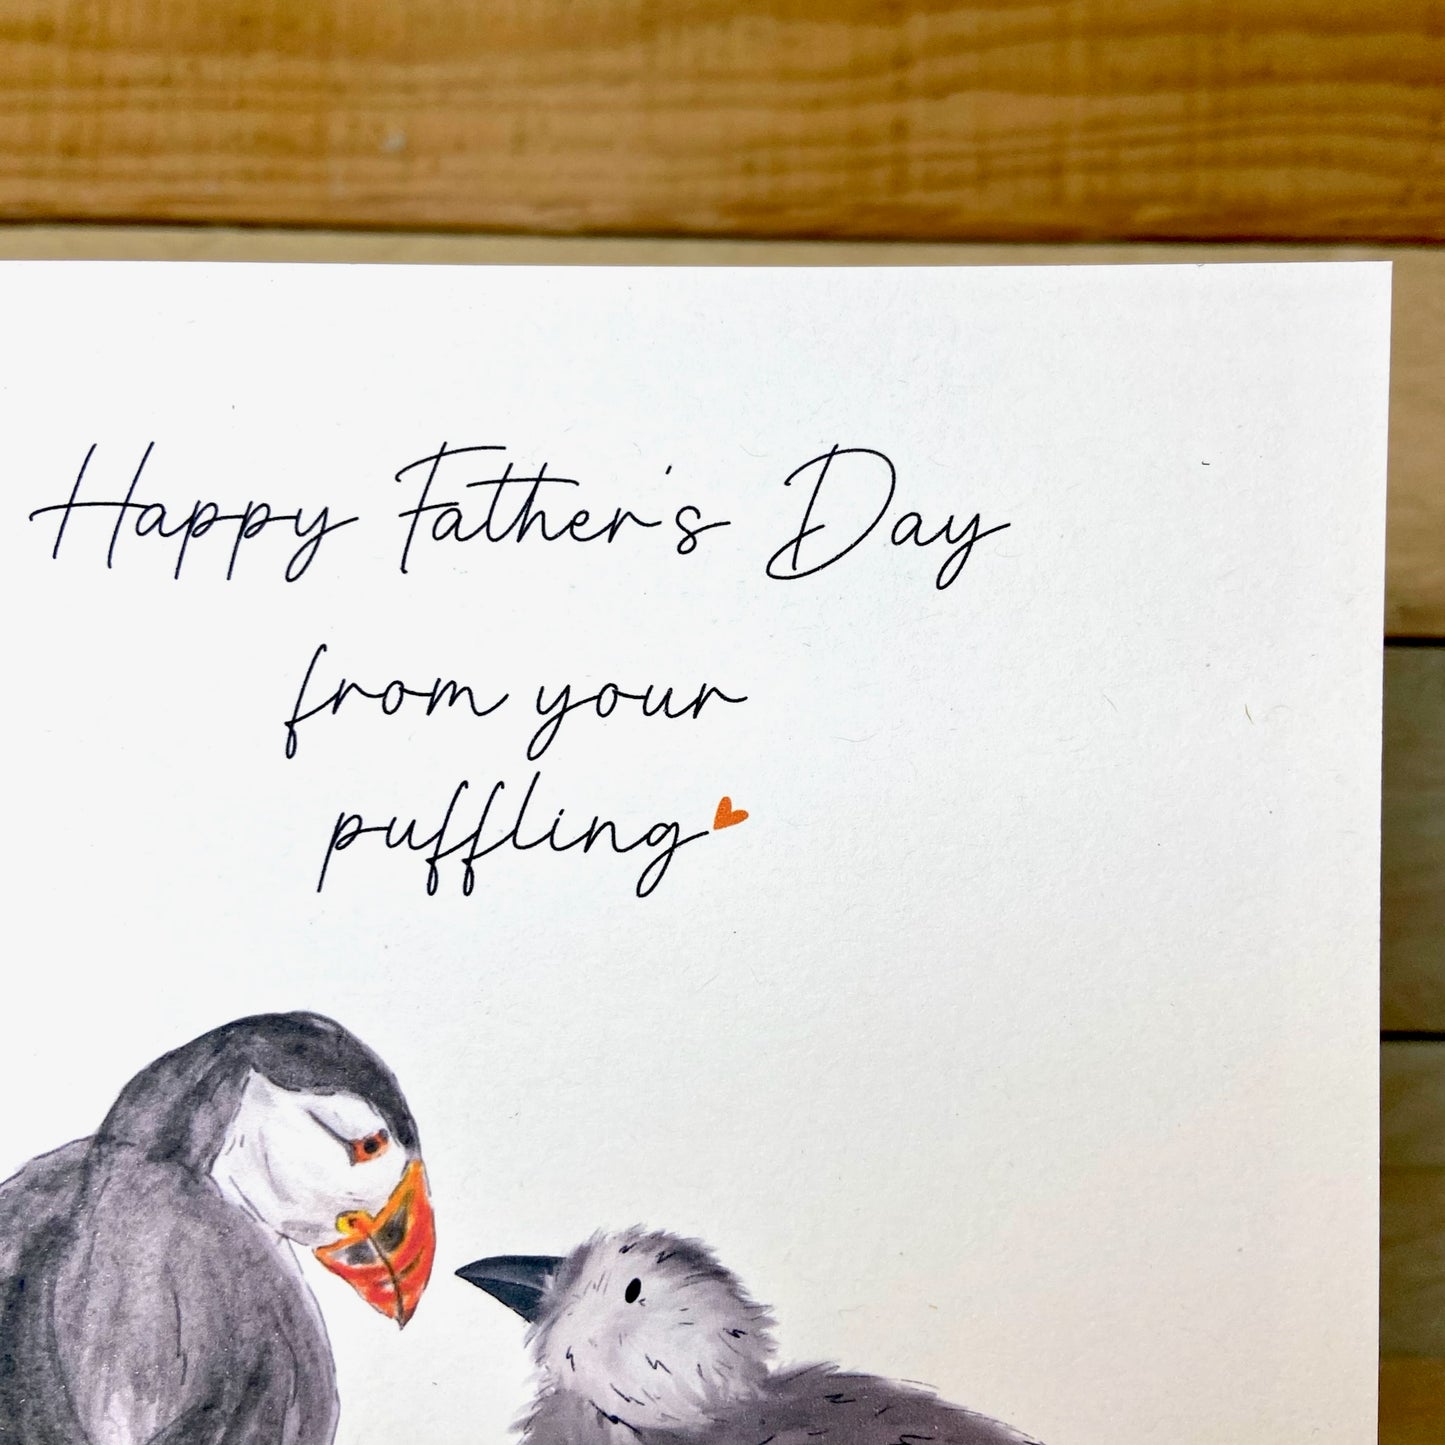 Puffling Father's Day Card